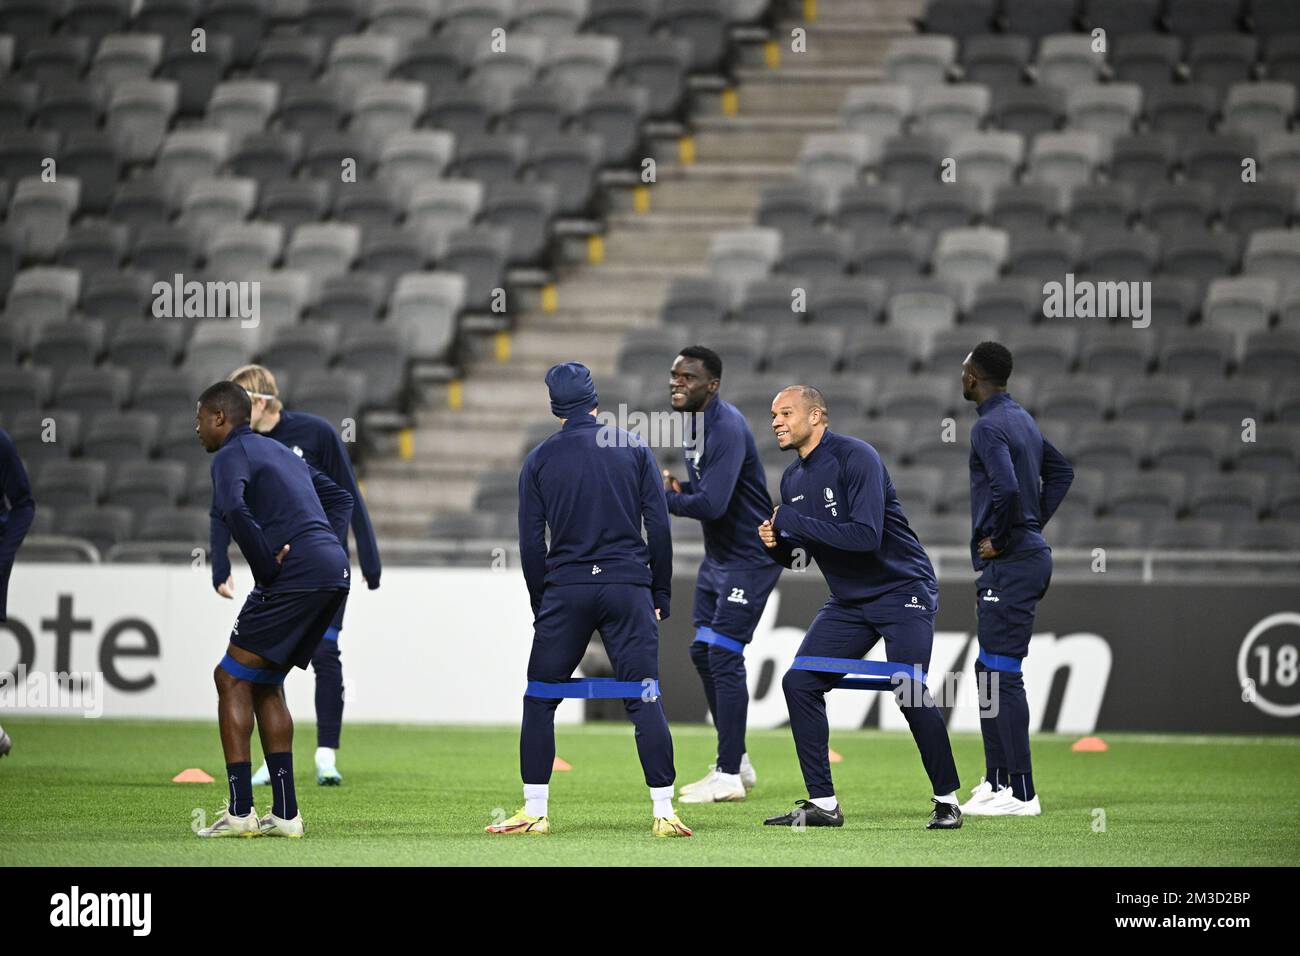 Gent's Sulayman Marreh (C) and Gent's Vadis Odjidja-Ofoe (2nd R) and other Gent's players pictured during a training session of Belgian soccer team KAA Gent, Wednesday 12 October 2022 in Johanneshov, Stockholm, Sweden, in preparation of tomorrow's game against Swedish team Djurgardens IF on day four of the Uefa Europa Conference League group stage. BELGA PHOTO JASPER JACOBS  Stock Photo